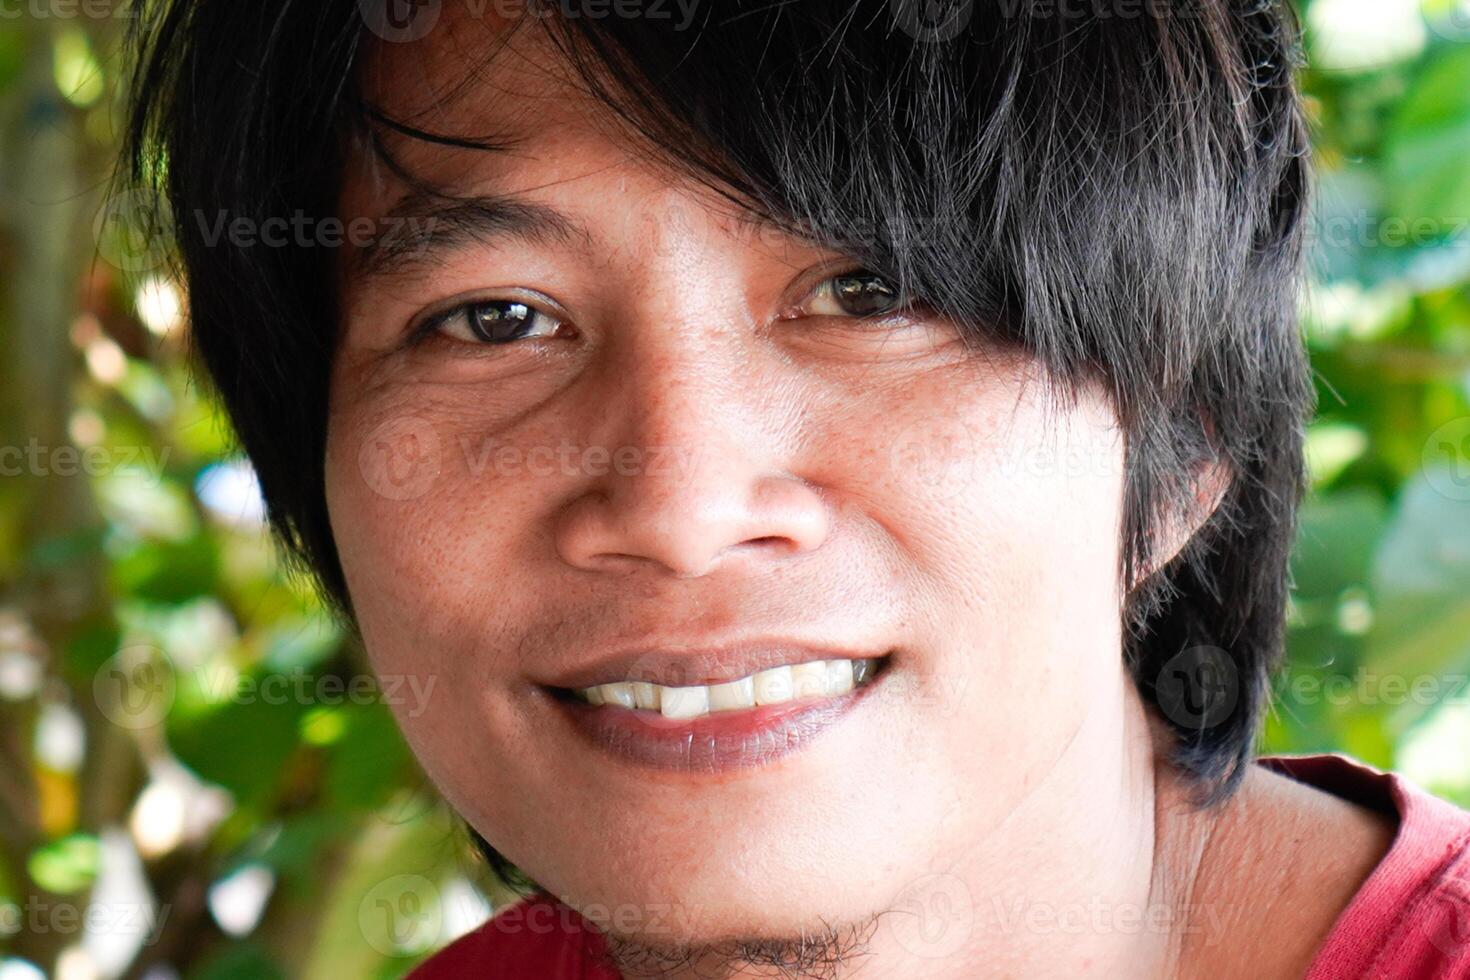 a close-up of the face of a Javanese man who appears to have long hair. photo